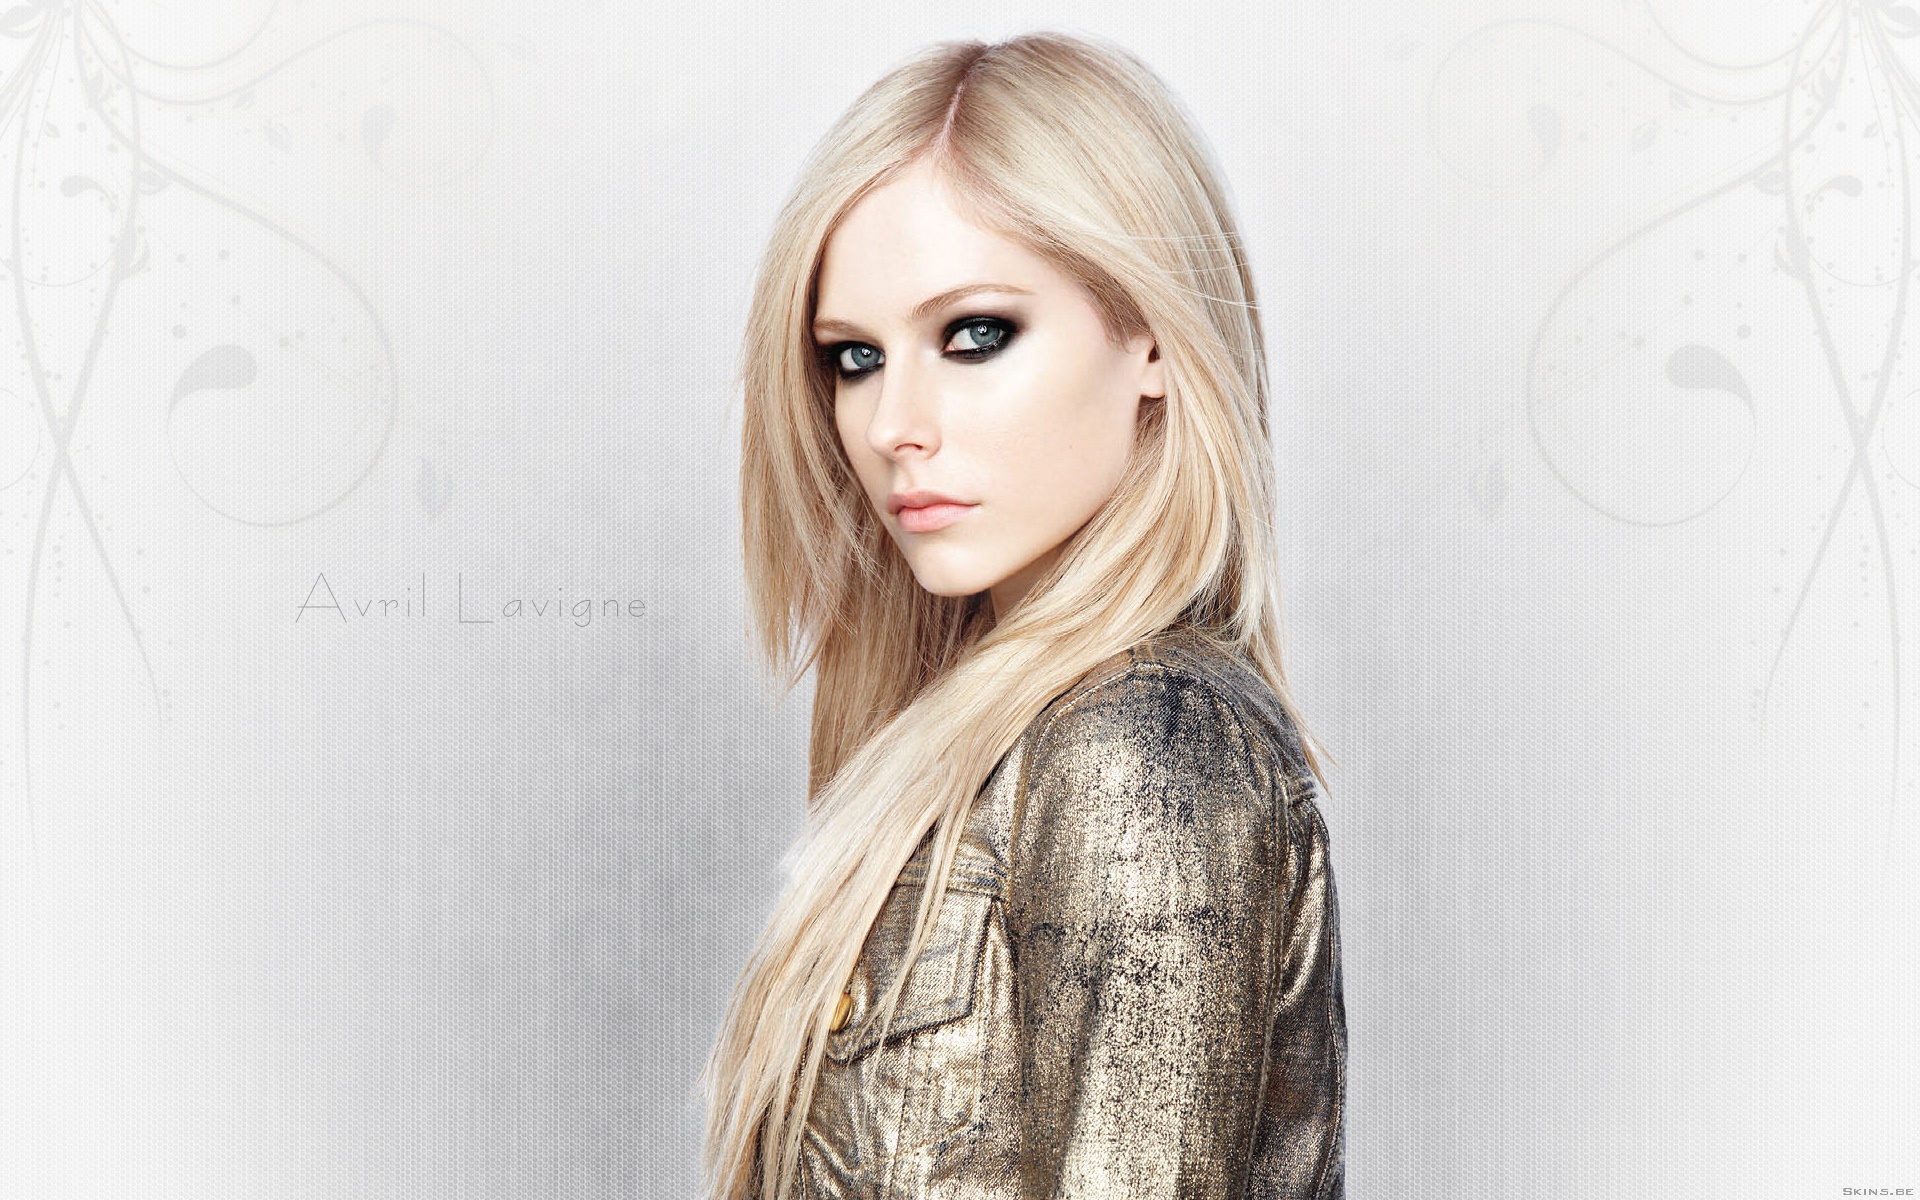 Download High quality Avril Lavigne wallpaper / Celebrities Female / 1920x1200